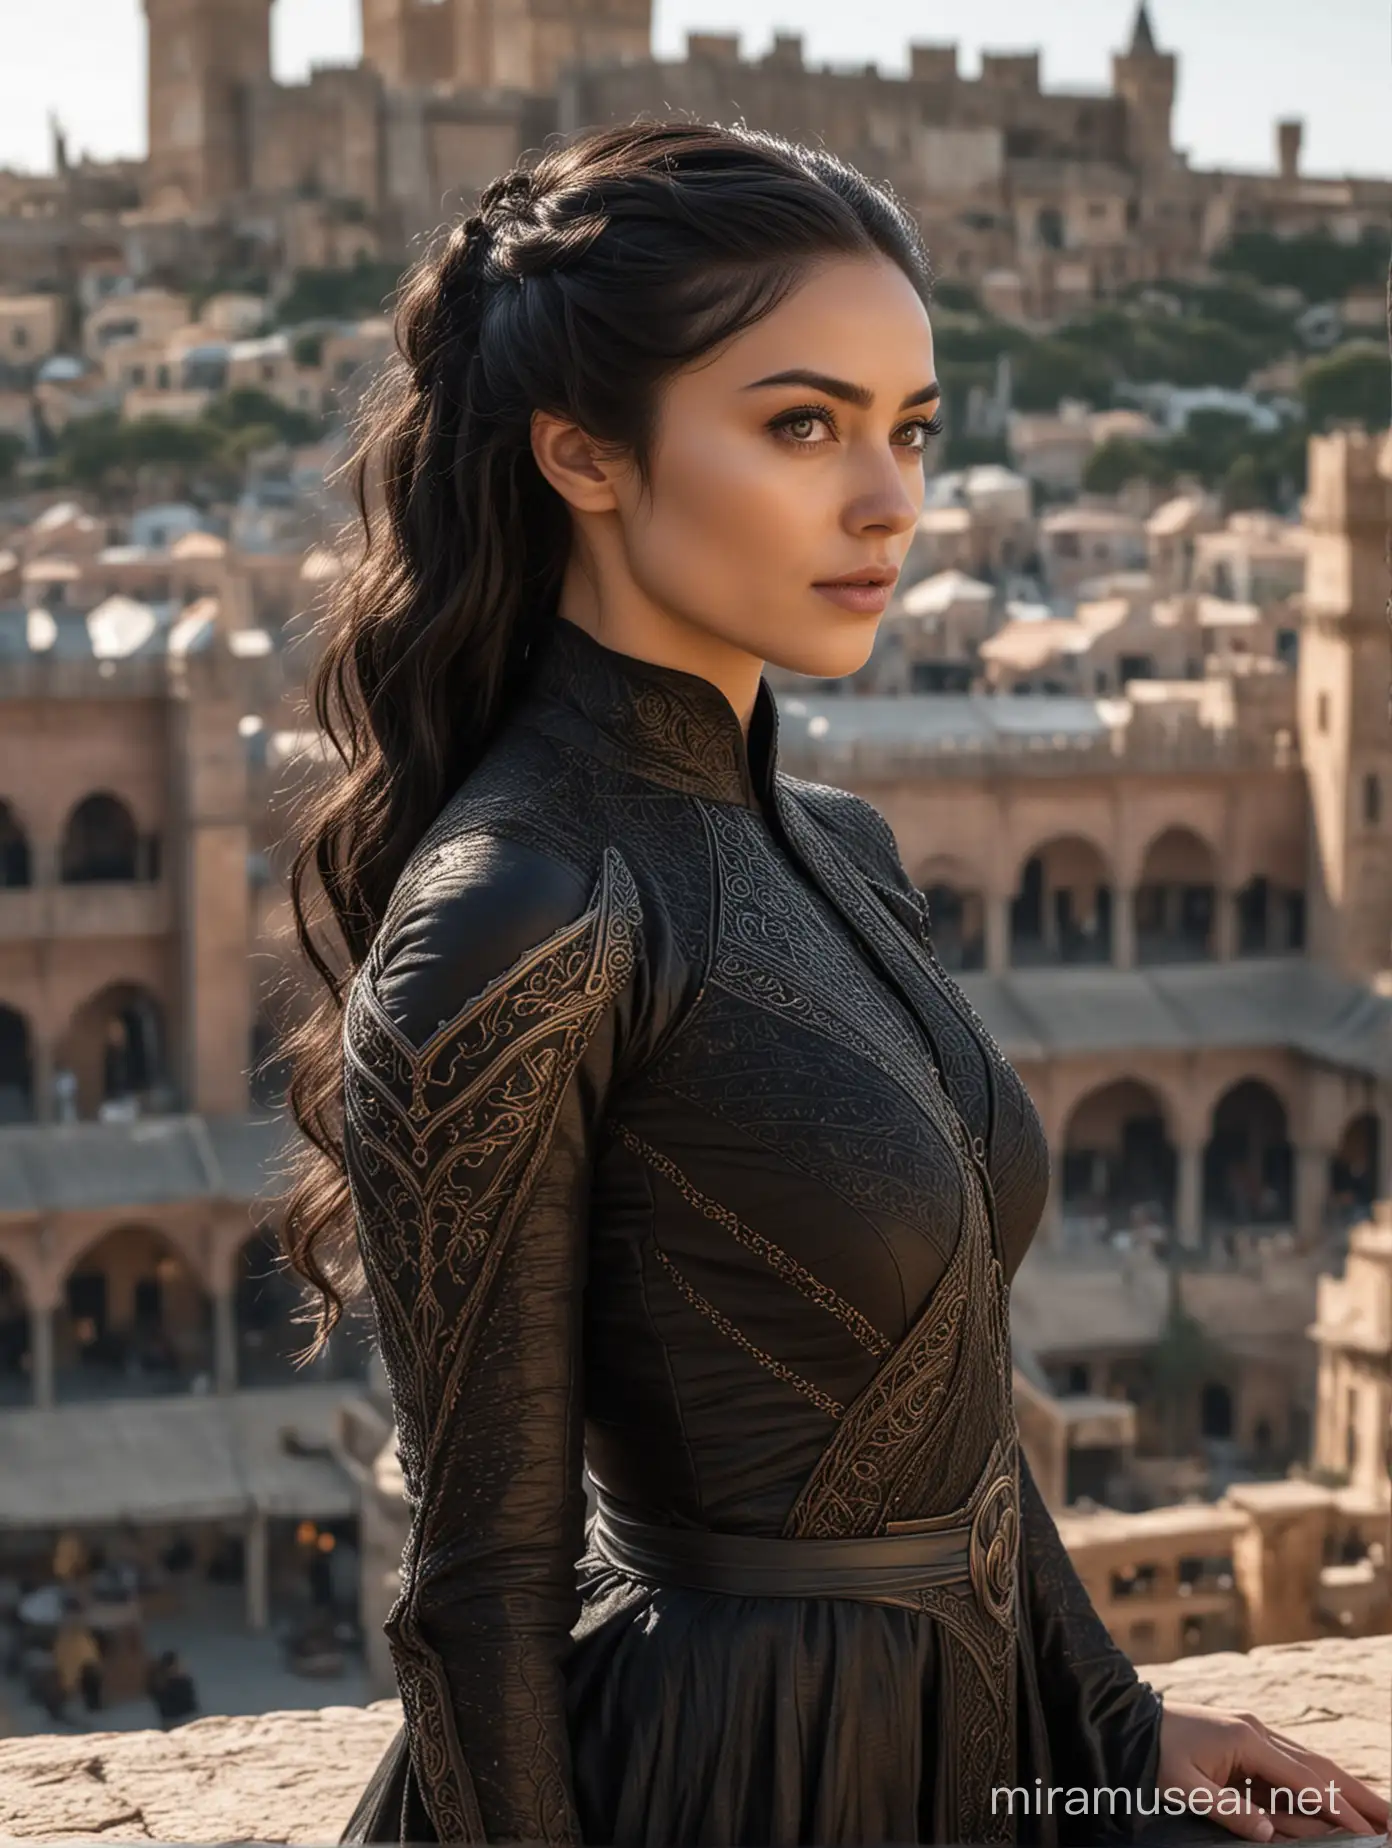 Valyrian woman, black valyrian style hair, cured skin, valyrian style long sleeved black dress, in the background the city of Dorne 